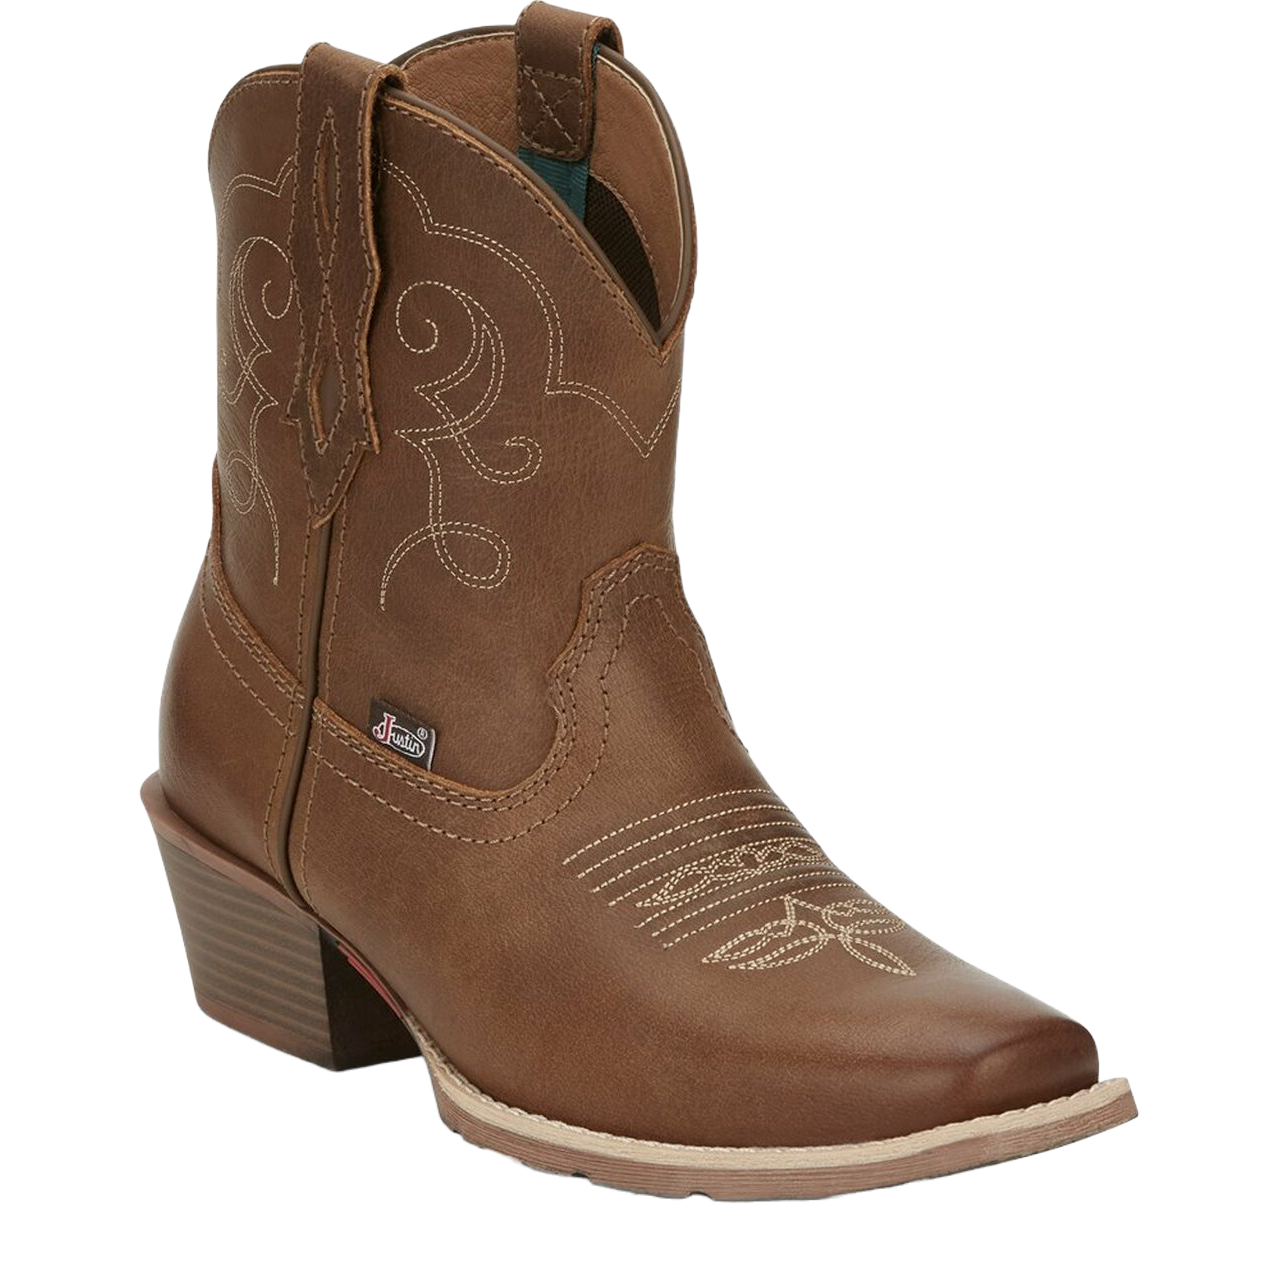 Justin® Ladies Chellie Tan Leather Western Square Toe Booties GY9510